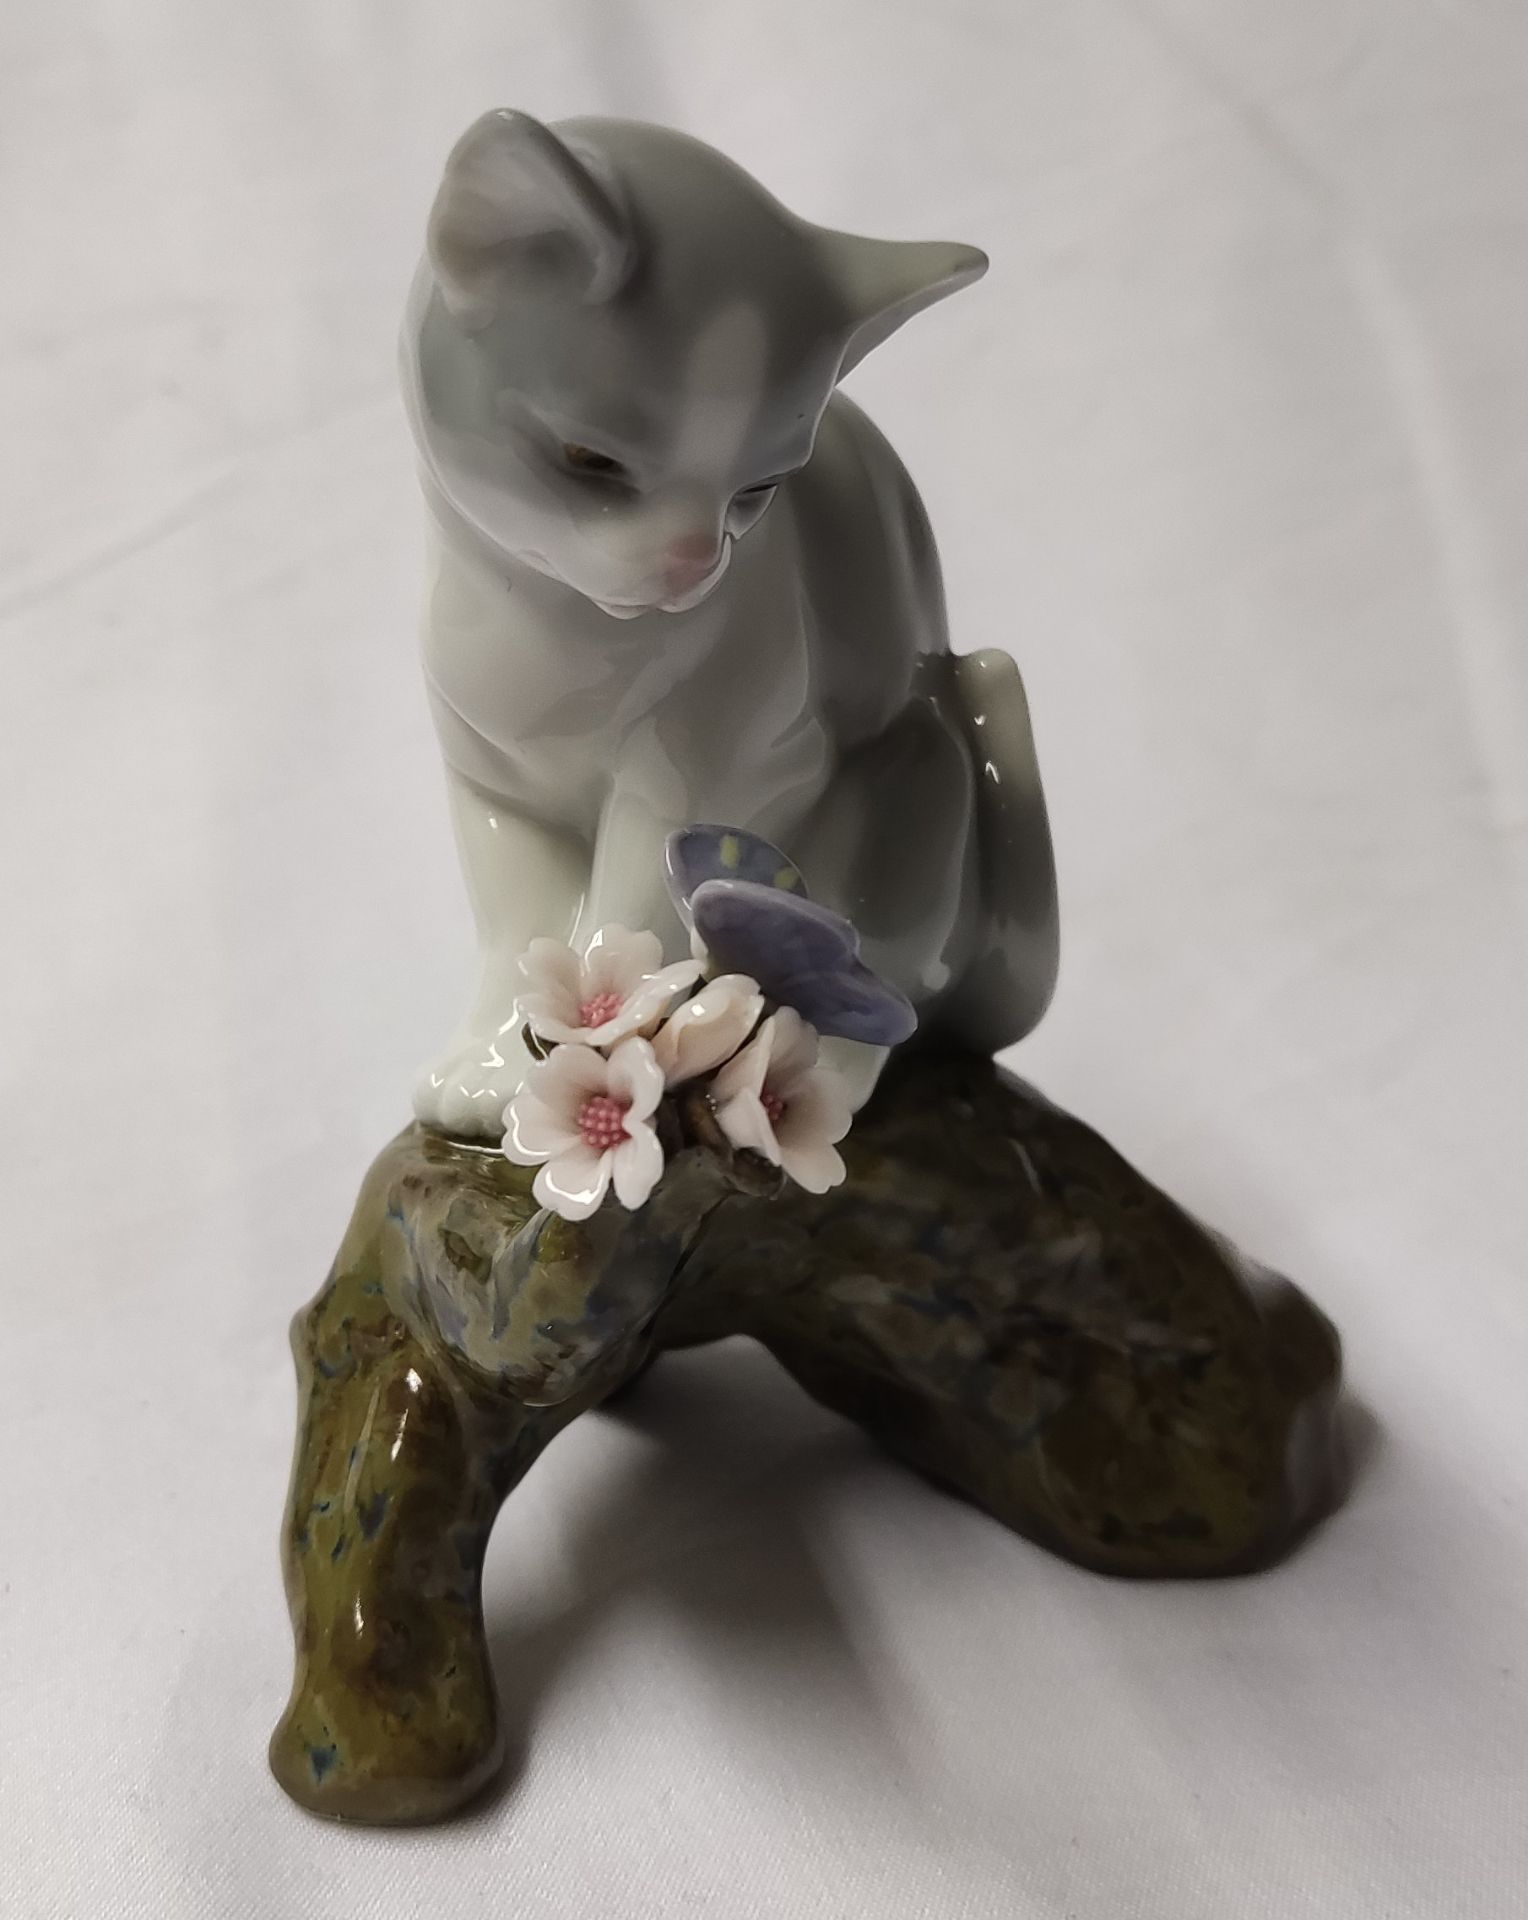 1 x LLADRO Blossoms For The Kitten Cat Porcelain Figurine - New/Boxed - RRP £270 - Ref: /HOC243/ - Image 5 of 21